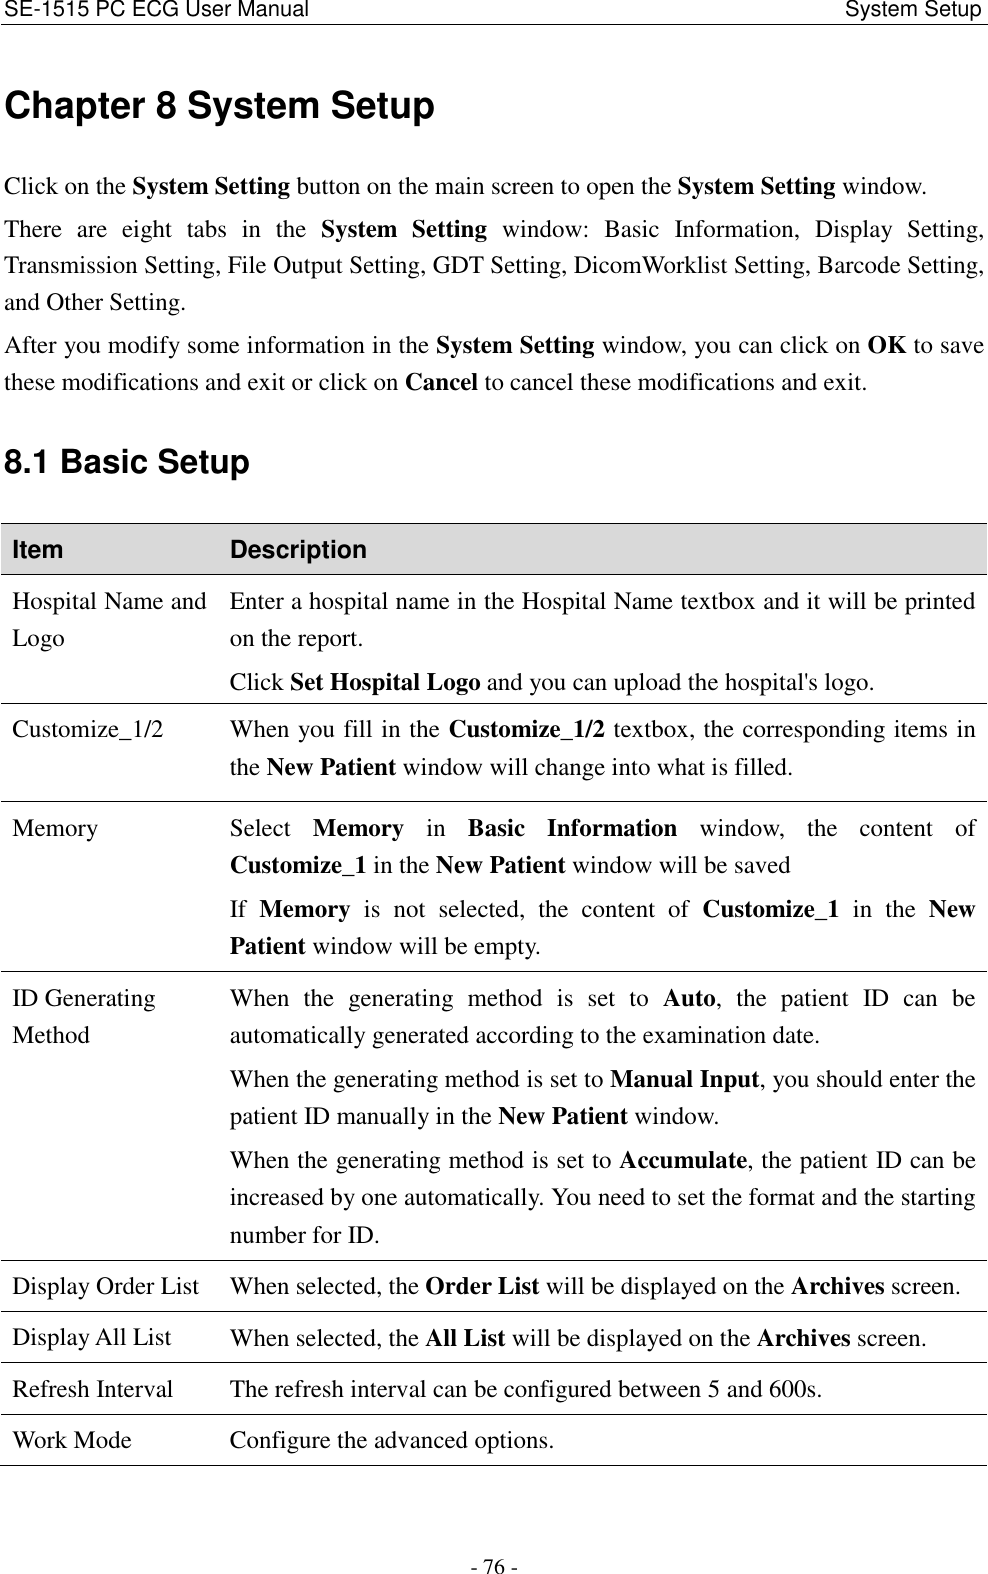 SE-1515 PC ECG User Manual                                                                                             System Setup - 76 - Chapter 8 System Setup Click on the System Setting button on the main screen to open the System Setting window. There  are  eight  tabs  in  the  System  Setting  window:  Basic  Information,  Display  Setting, Transmission Setting, File Output Setting, GDT Setting, DicomWorklist Setting, Barcode Setting, and Other Setting. After you modify some information in the System Setting window, you can click on OK to save these modifications and exit or click on Cancel to cancel these modifications and exit. 8.1 Basic Setup Item Description Hospital Name and Logo Enter a hospital name in the Hospital Name textbox and it will be printed on the report. Click Set Hospital Logo and you can upload the hospital&apos;s logo. Customize_1/2 When you fill in the Customize_1/2 textbox, the corresponding items in the New Patient window will change into what is filled. Memory Select  Memory  in  Basic  Information  window,  the  content  of Customize_1 in the New Patient window will be saved If  Memory  is  not  selected,  the  content  of  Customize_1  in  the  New Patient window will be empty. ID Generating Method When  the  generating  method  is  set  to  Auto,  the  patient  ID  can  be automatically generated according to the examination date. When the generating method is set to Manual Input, you should enter the patient ID manually in the New Patient window. When the generating method is set to Accumulate, the patient ID can be increased by one automatically. You need to set the format and the starting number for ID. Display Order List When selected, the Order List will be displayed on the Archives screen.   Display All List When selected, the All List will be displayed on the Archives screen. Refresh Interval The refresh interval can be configured between 5 and 600s. Work Mode Configure the advanced options. 